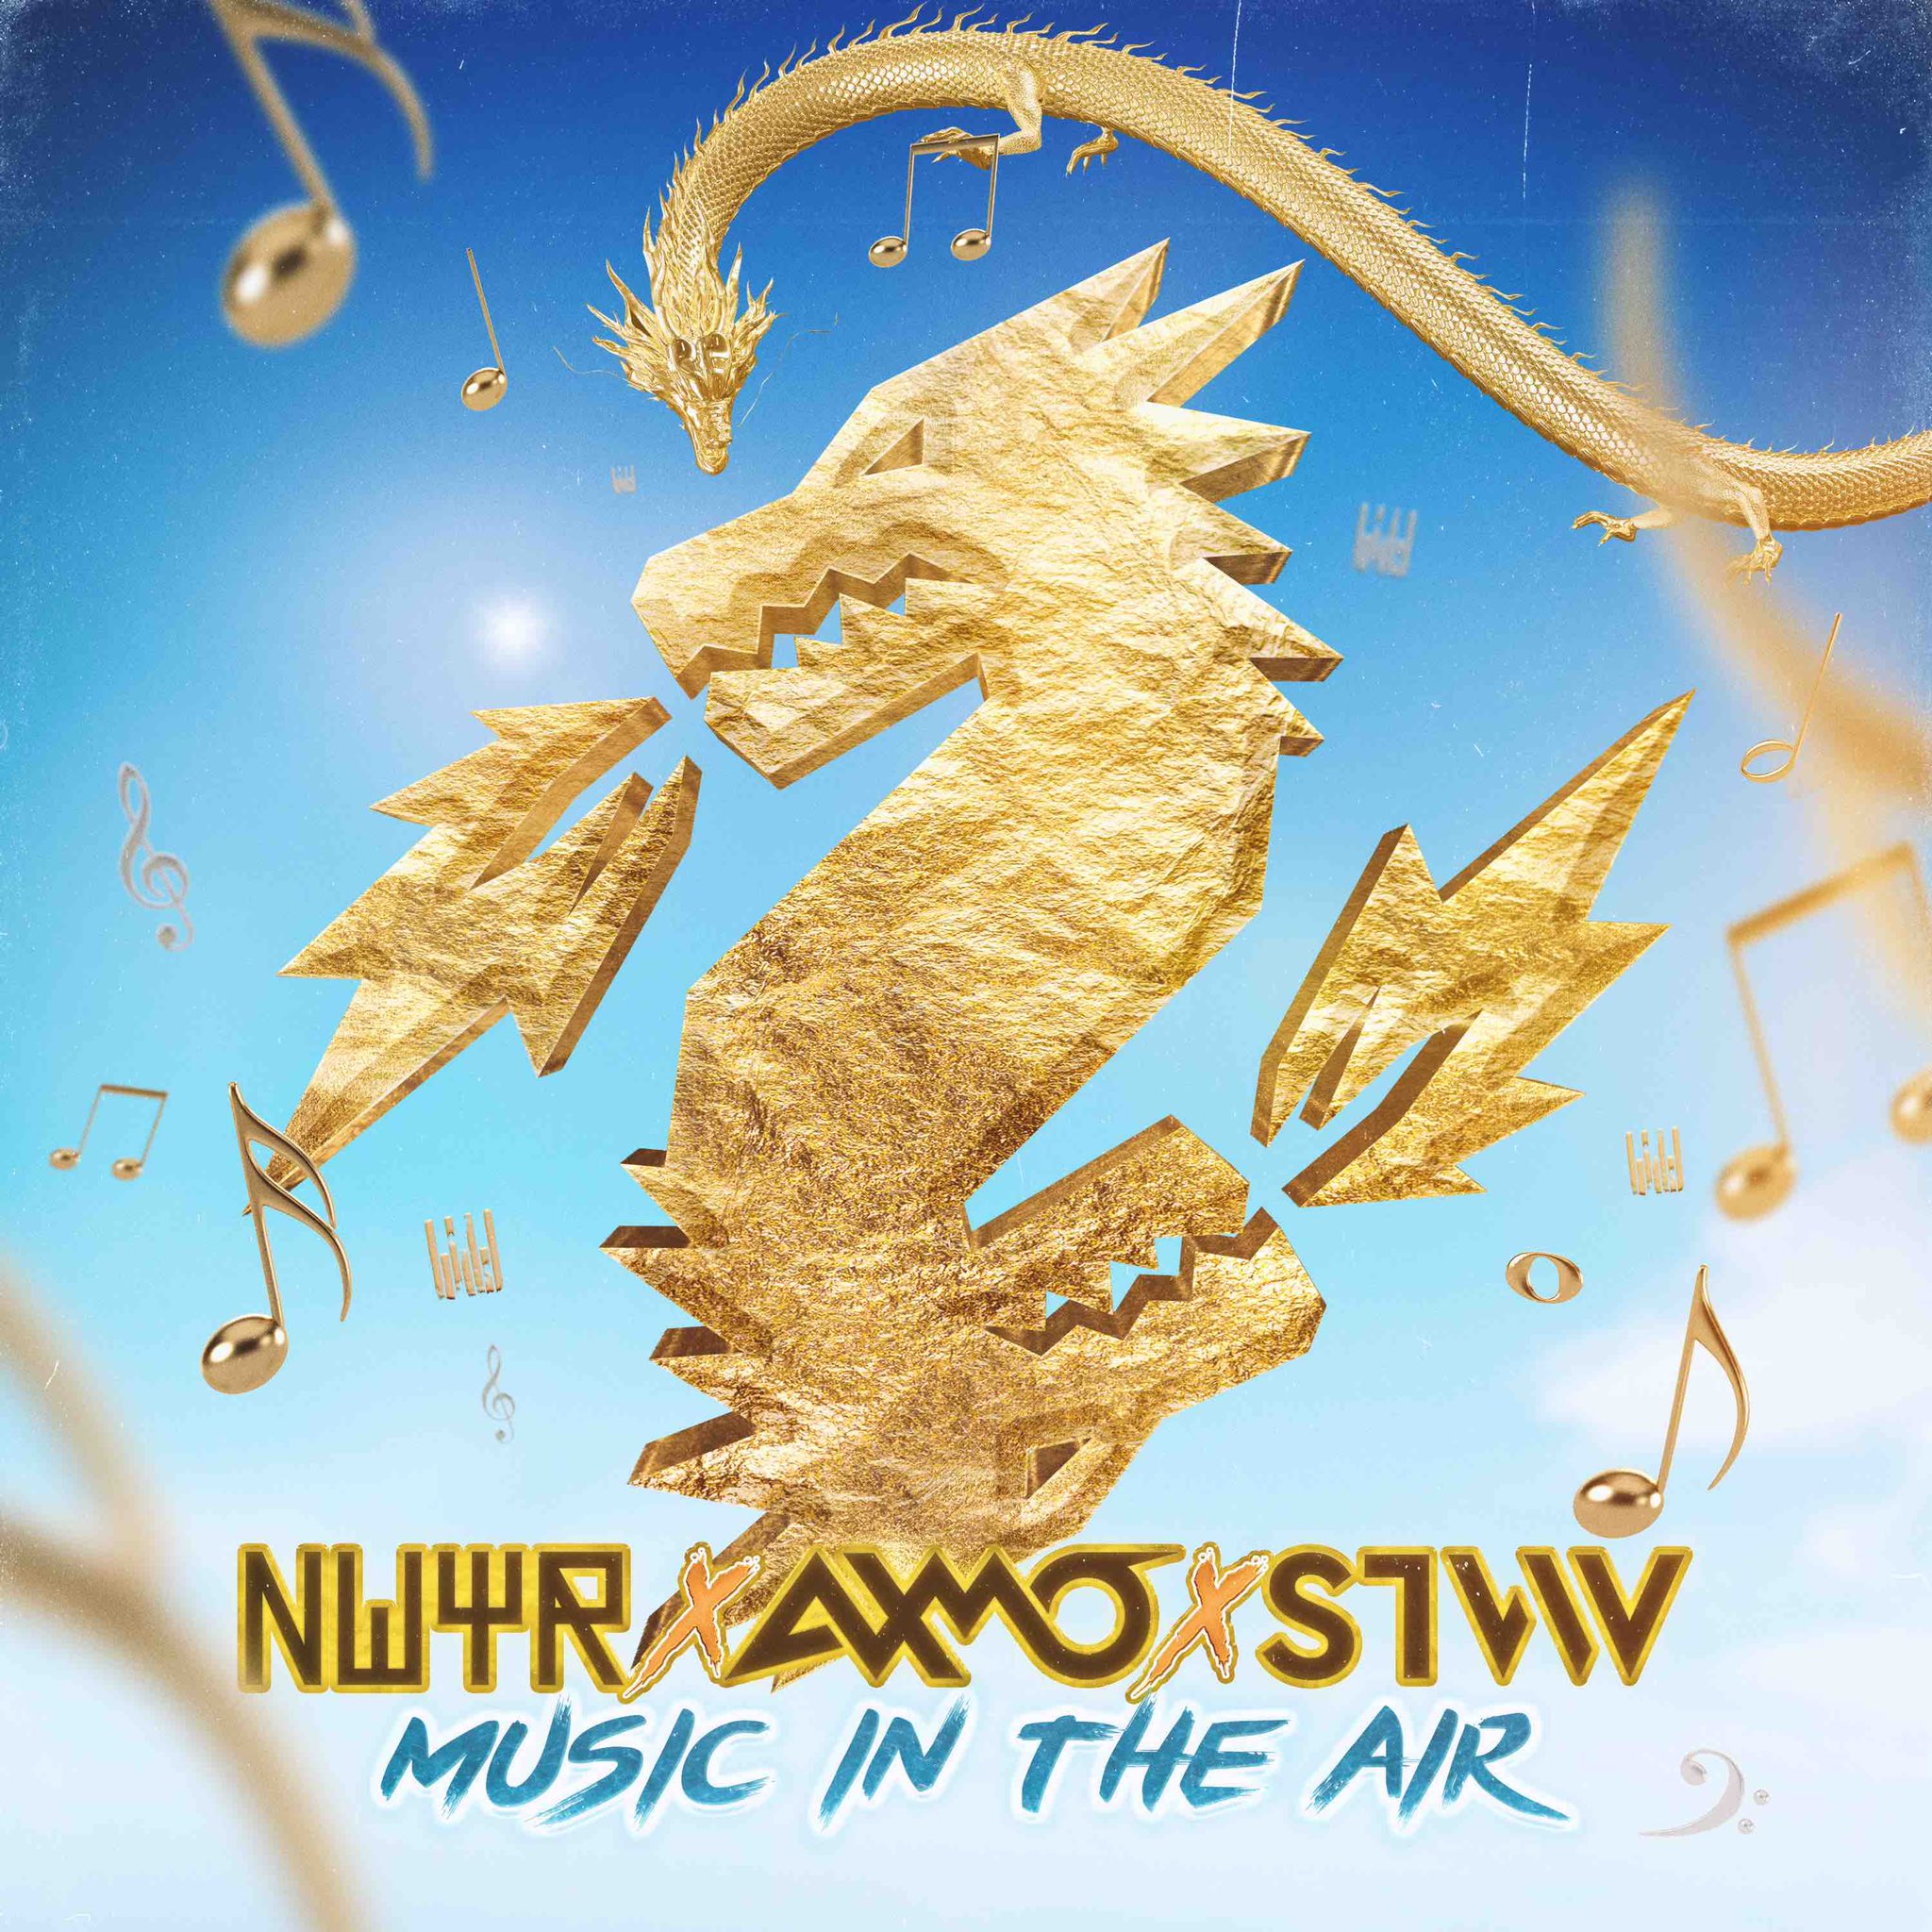 NWYR, AXMO, & STVW Music In The Air cover artwork